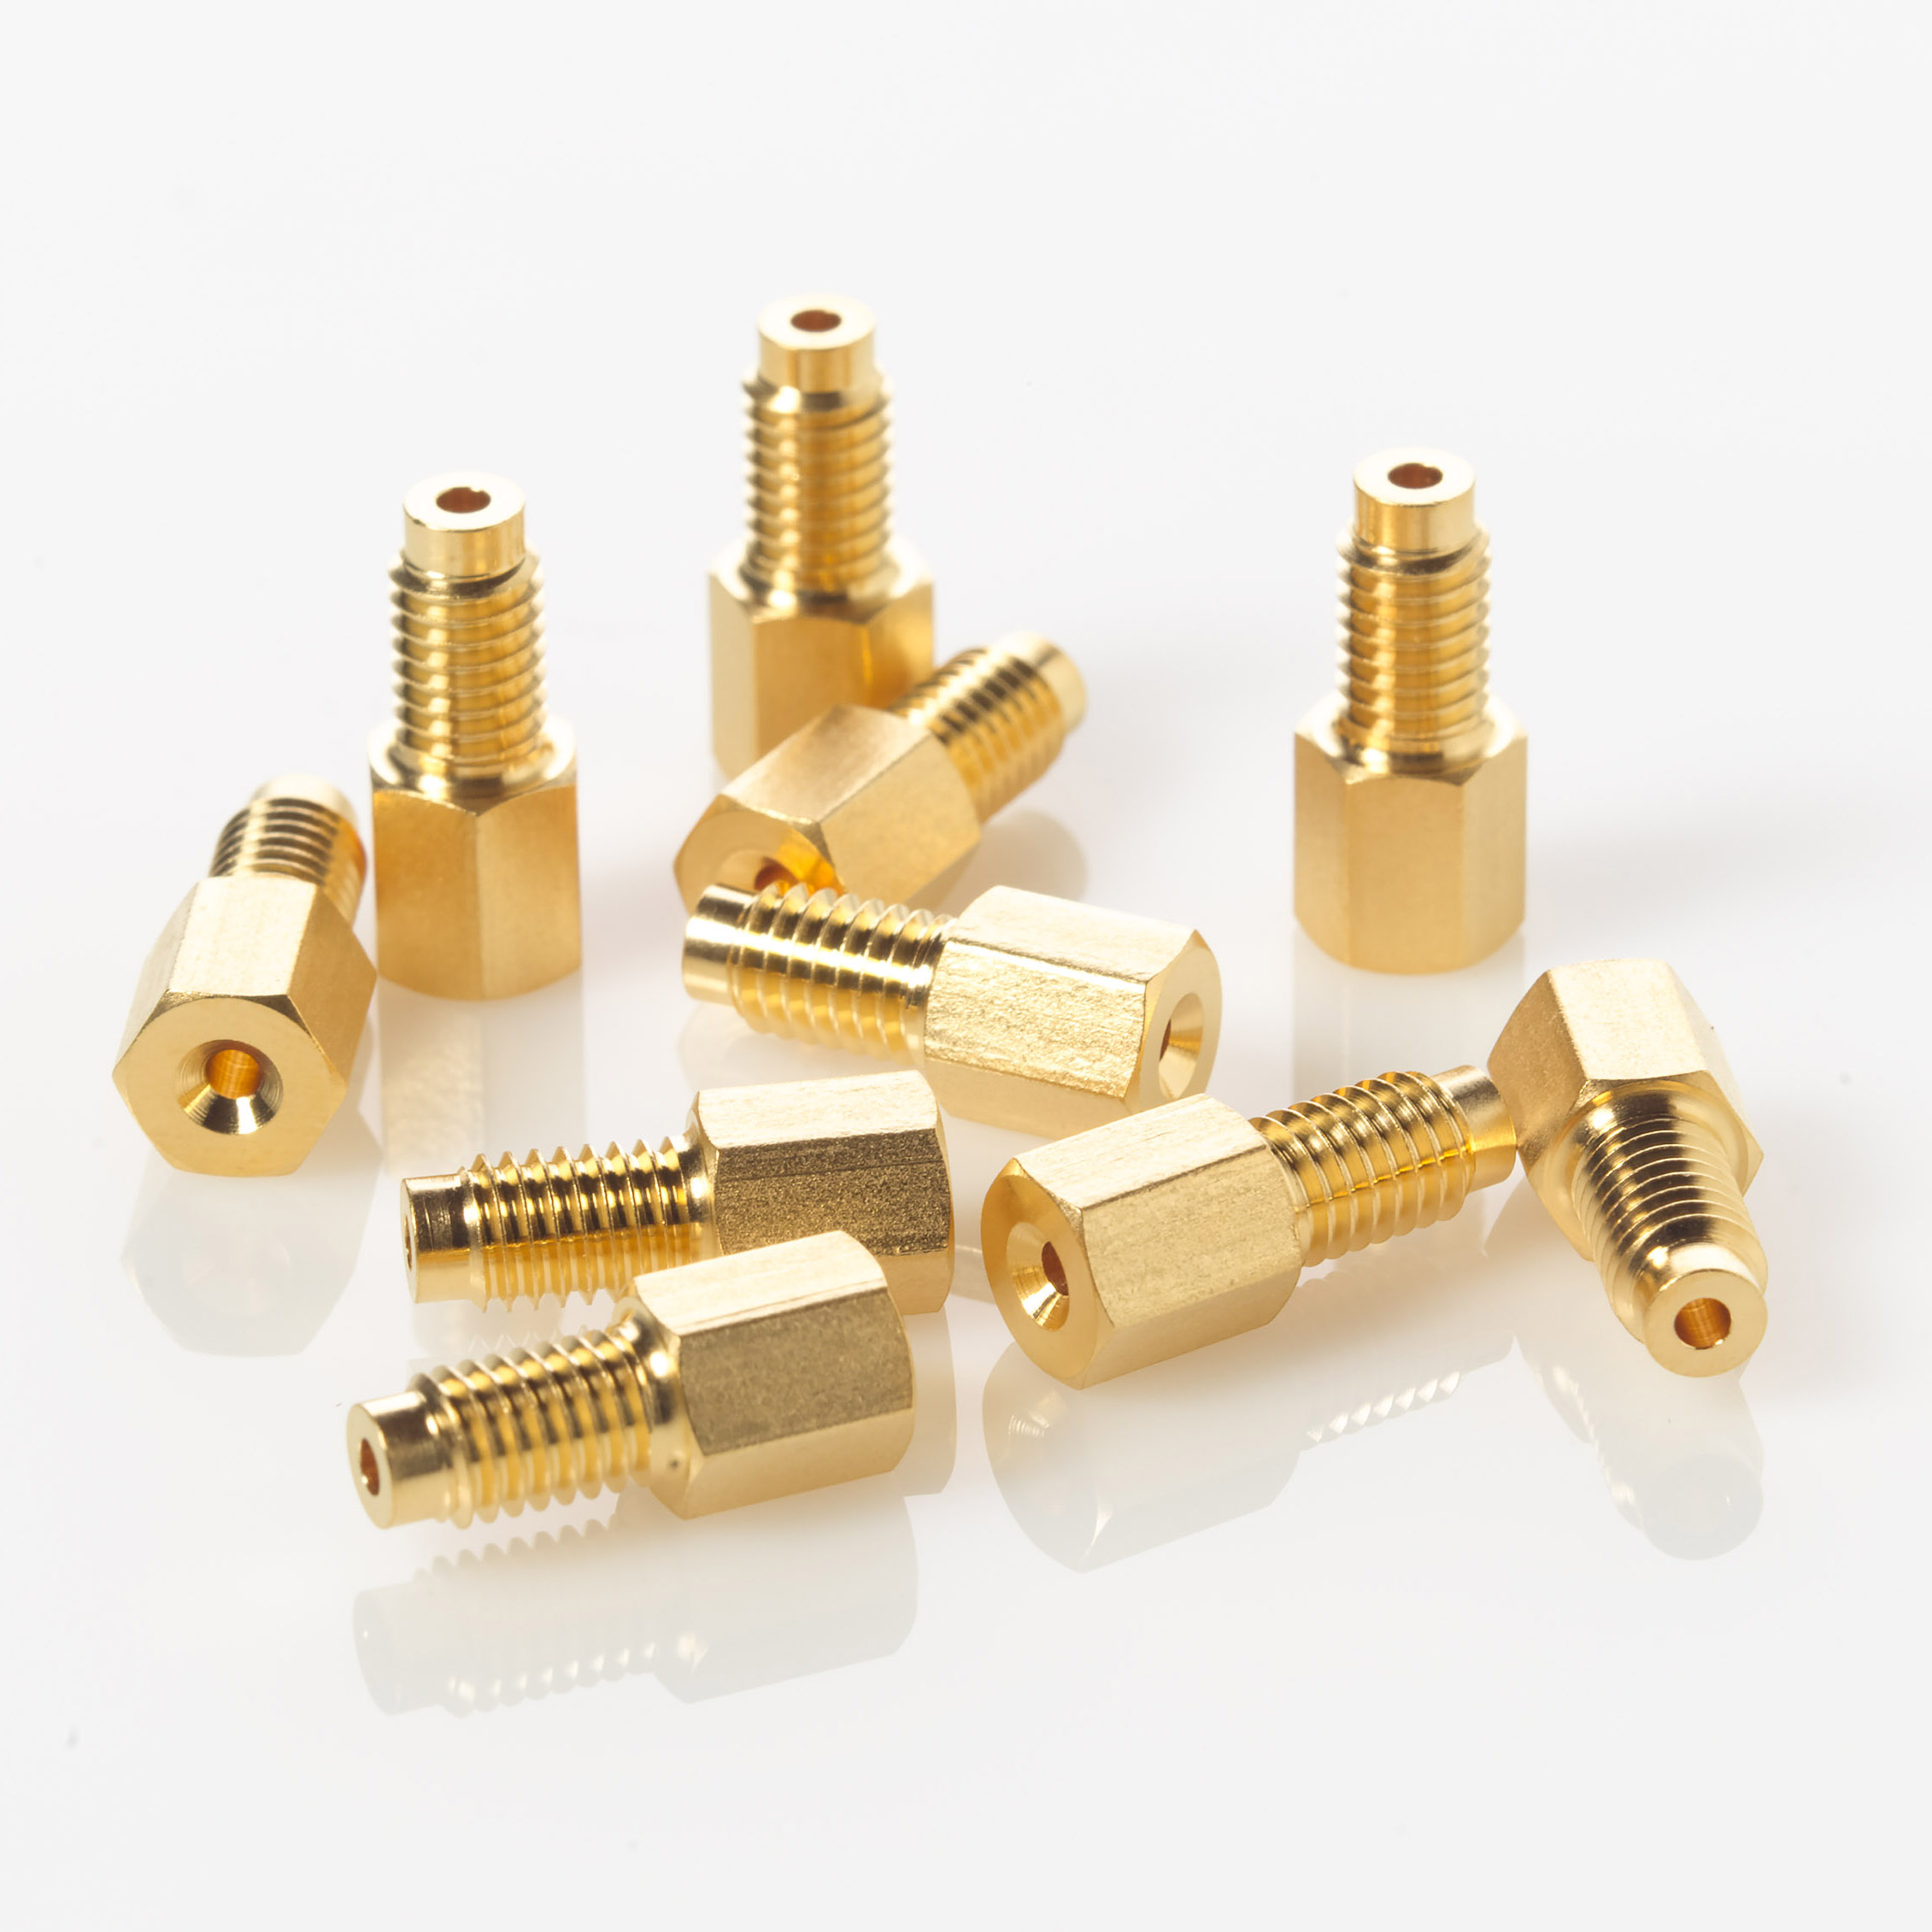 Screw, Comp., 10-32, 304SS, (Gold-Plated), 10/pk